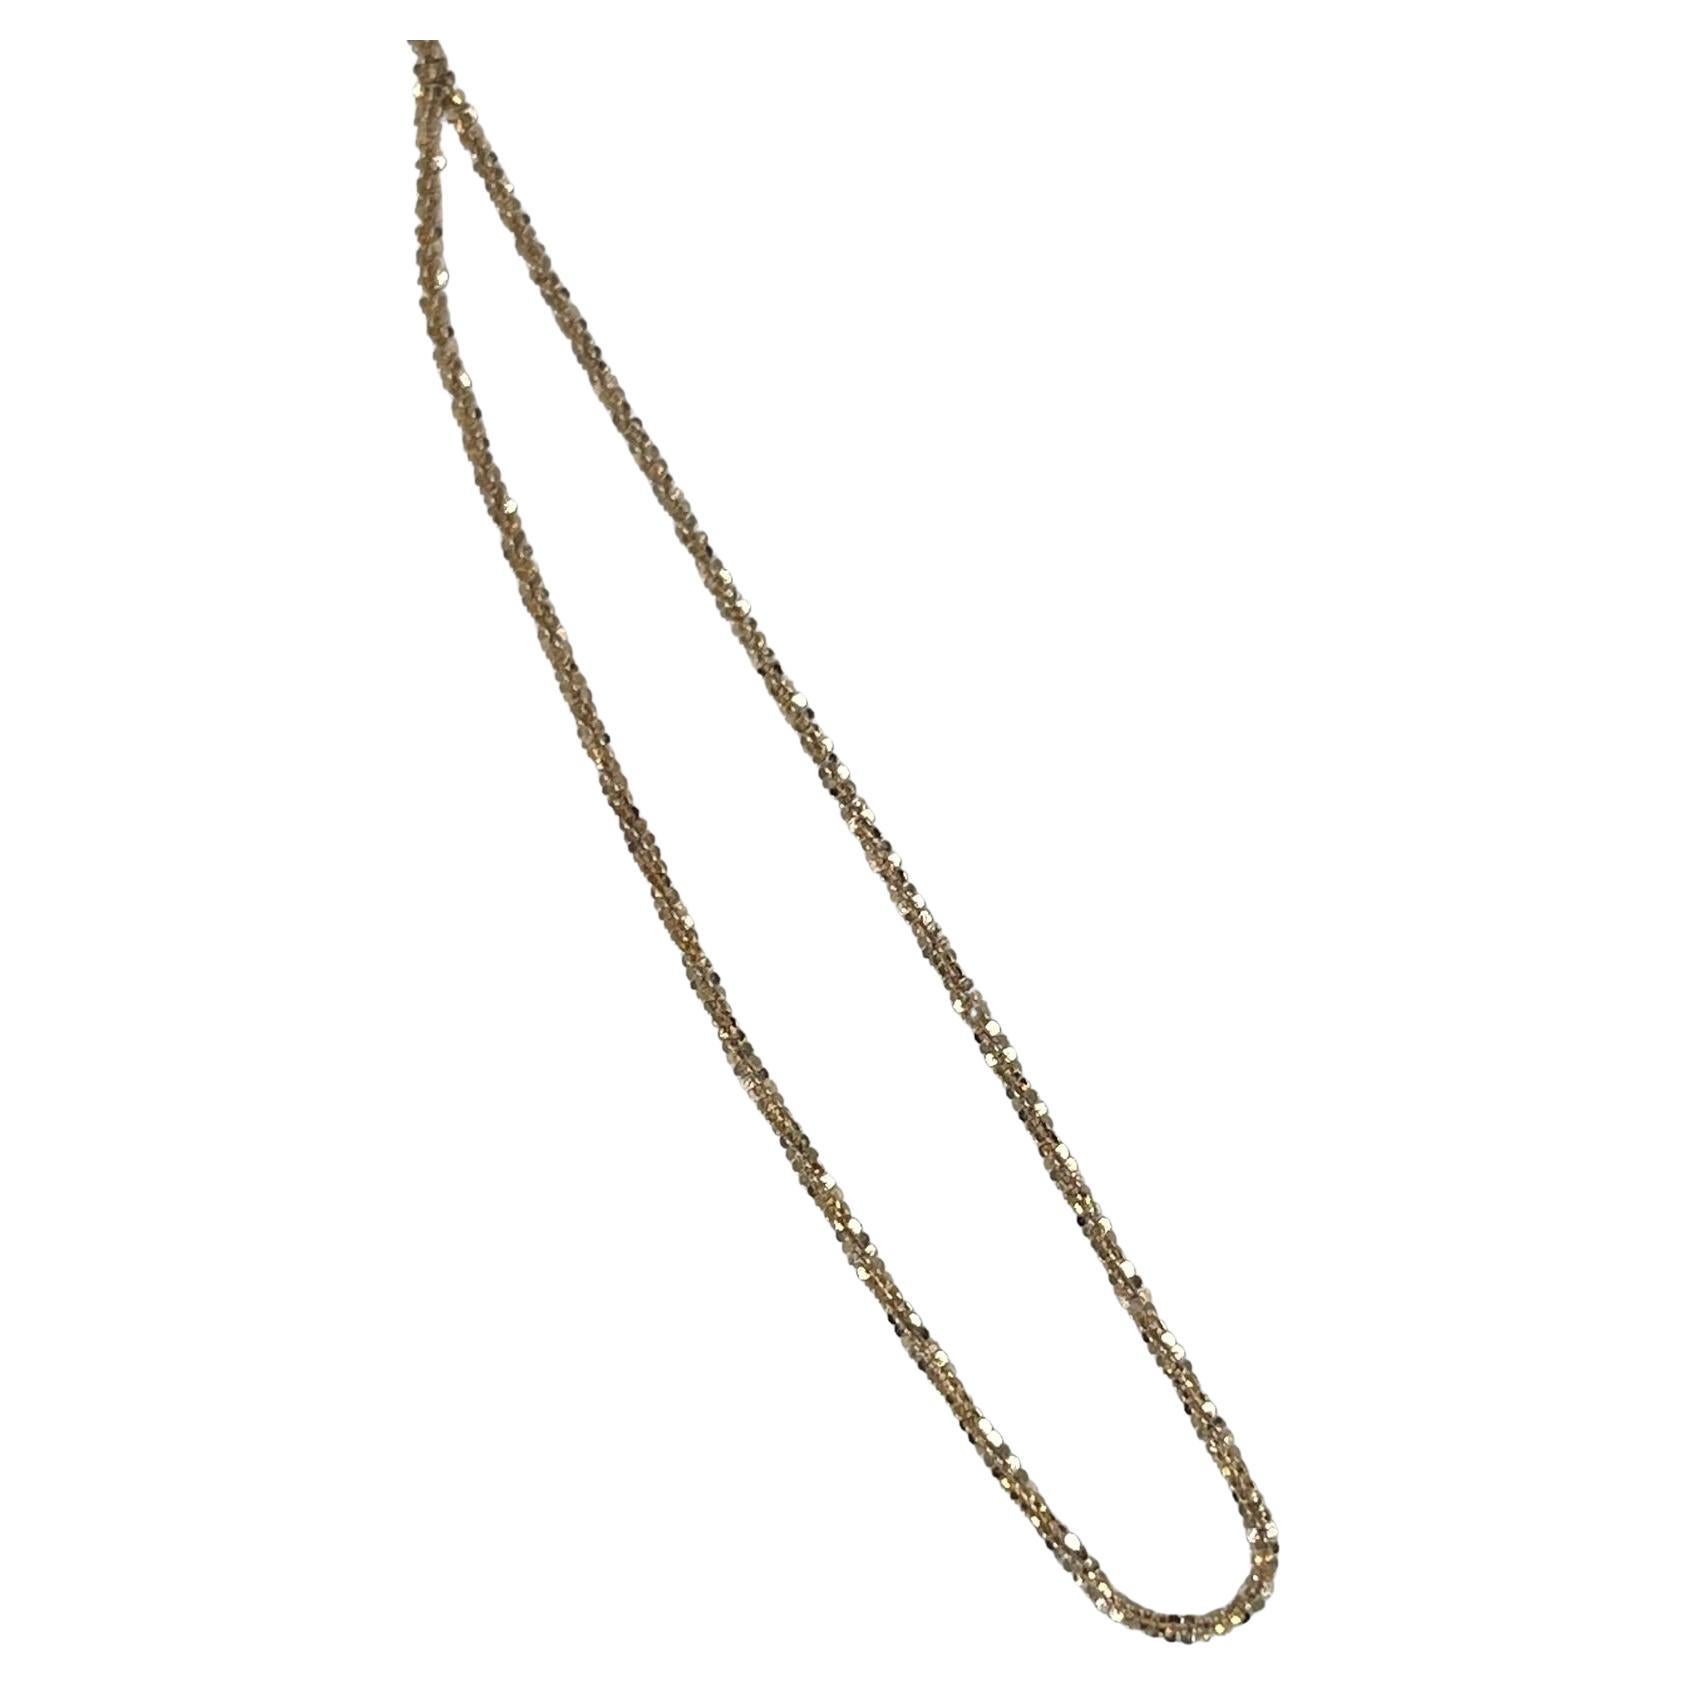 Fancy Gold Chain 10KT Yellow Gold Sparkling Diamond Chain Necklace Plain Solid